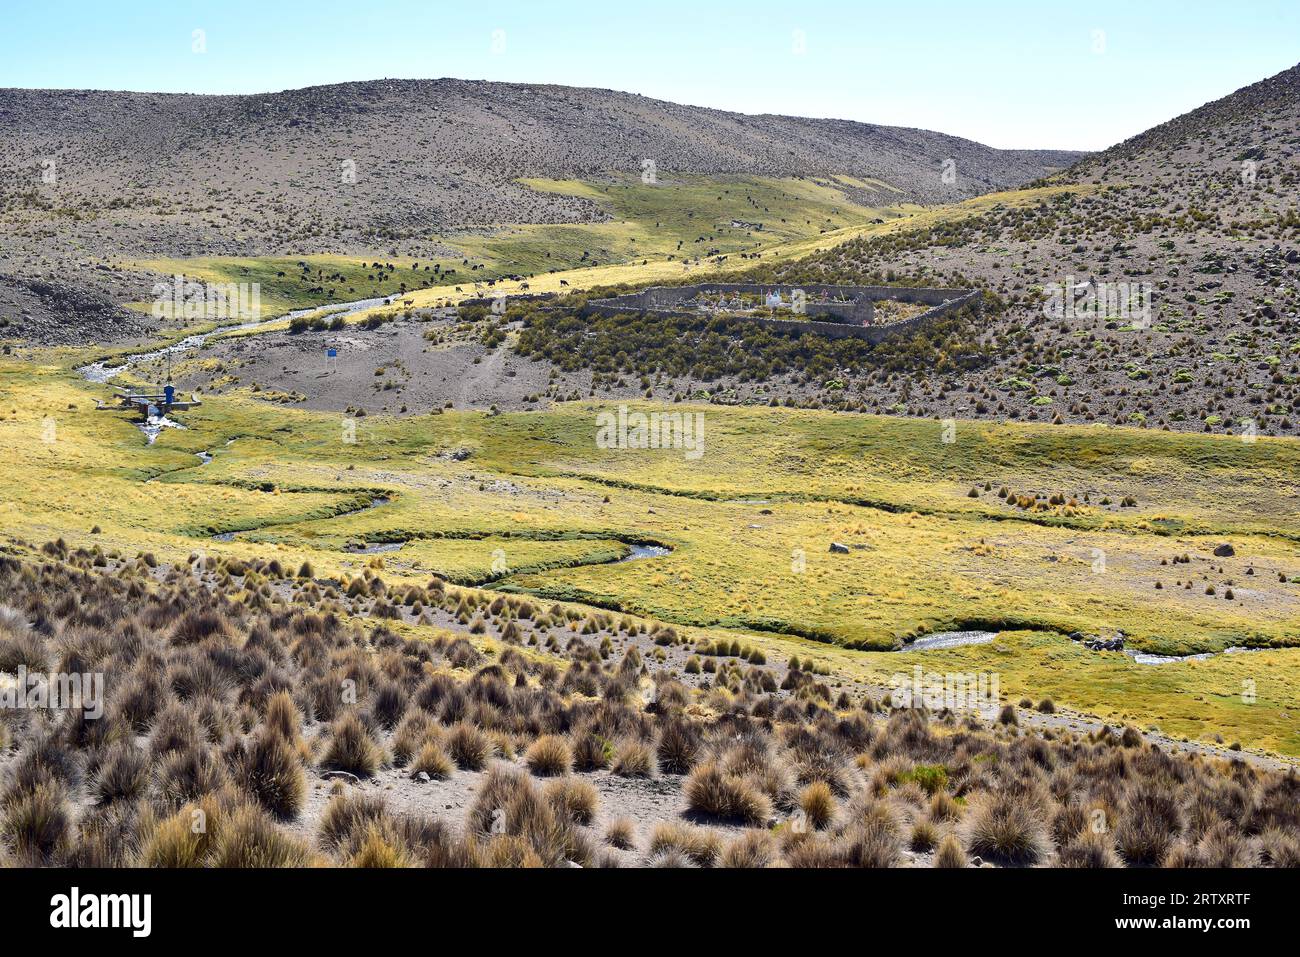 Bofedal (wetland) is a montane grassland whose dominant plant species are Distichia muscoides and Oxychloe andina (Juncaceae family). This photo was t Stock Photo